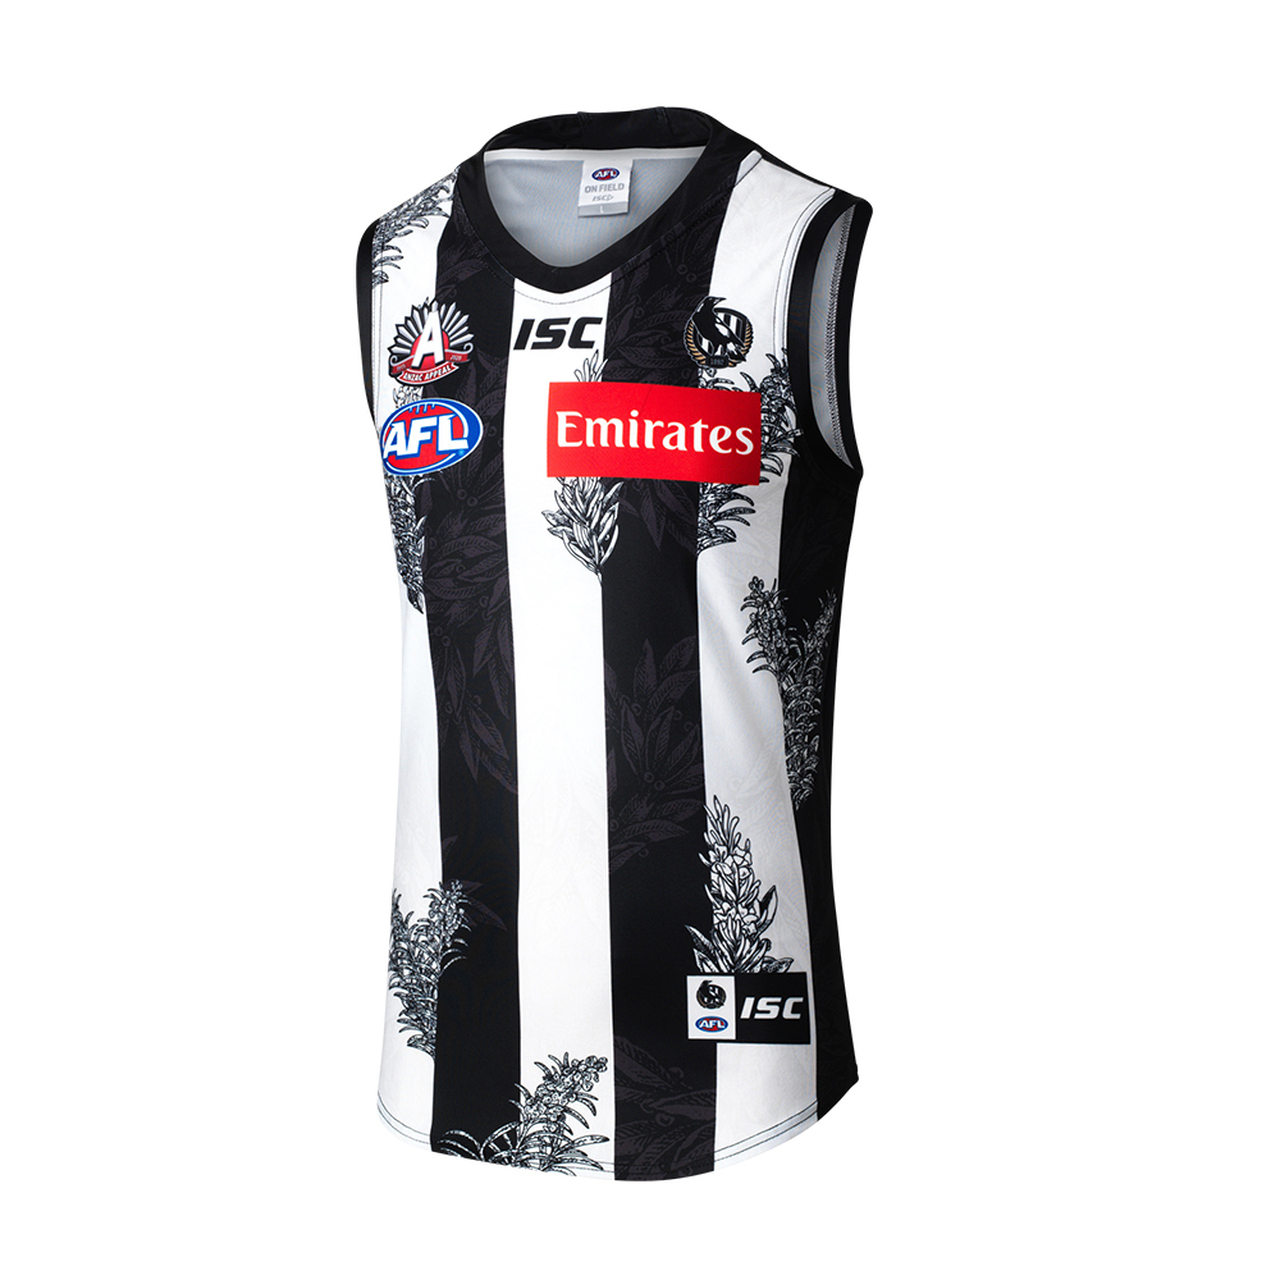 Collingwood Magpies AFL 2020 ISC Home ISC Guernsey Adults Sizes S-7XL! 